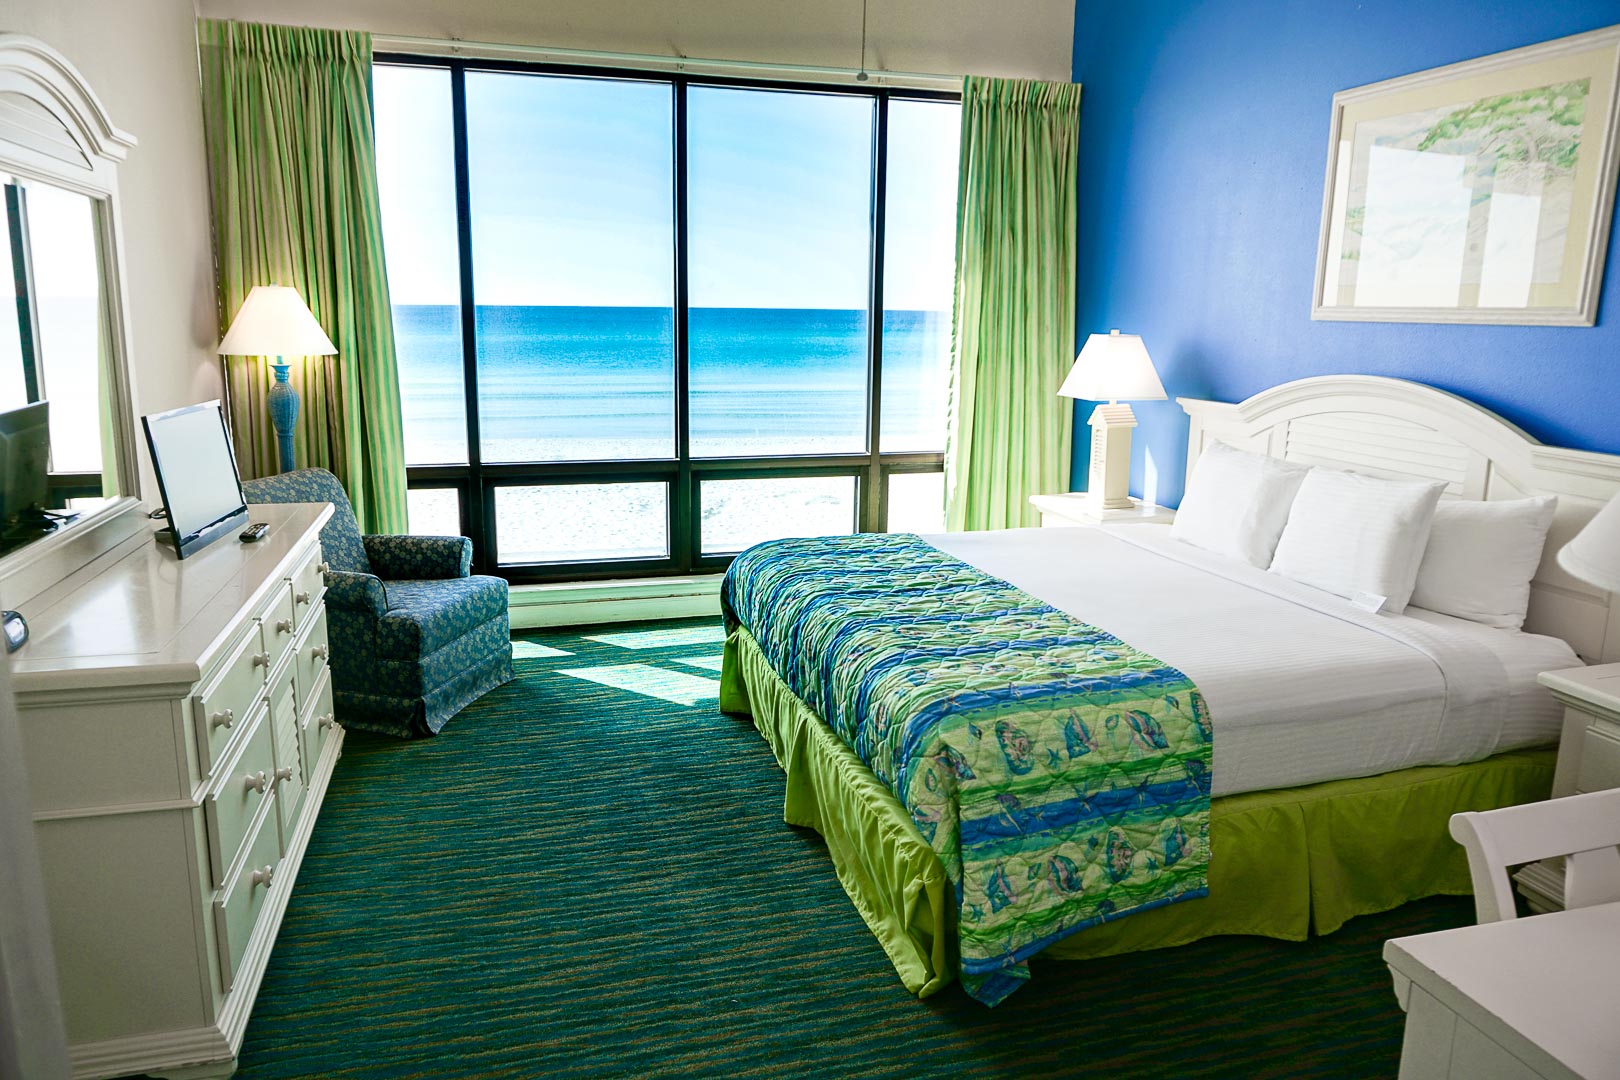 A beautiful master bedroom with a view to the beach at VRI's Landmark Holiday Beach Resort in Panama City, Florida.